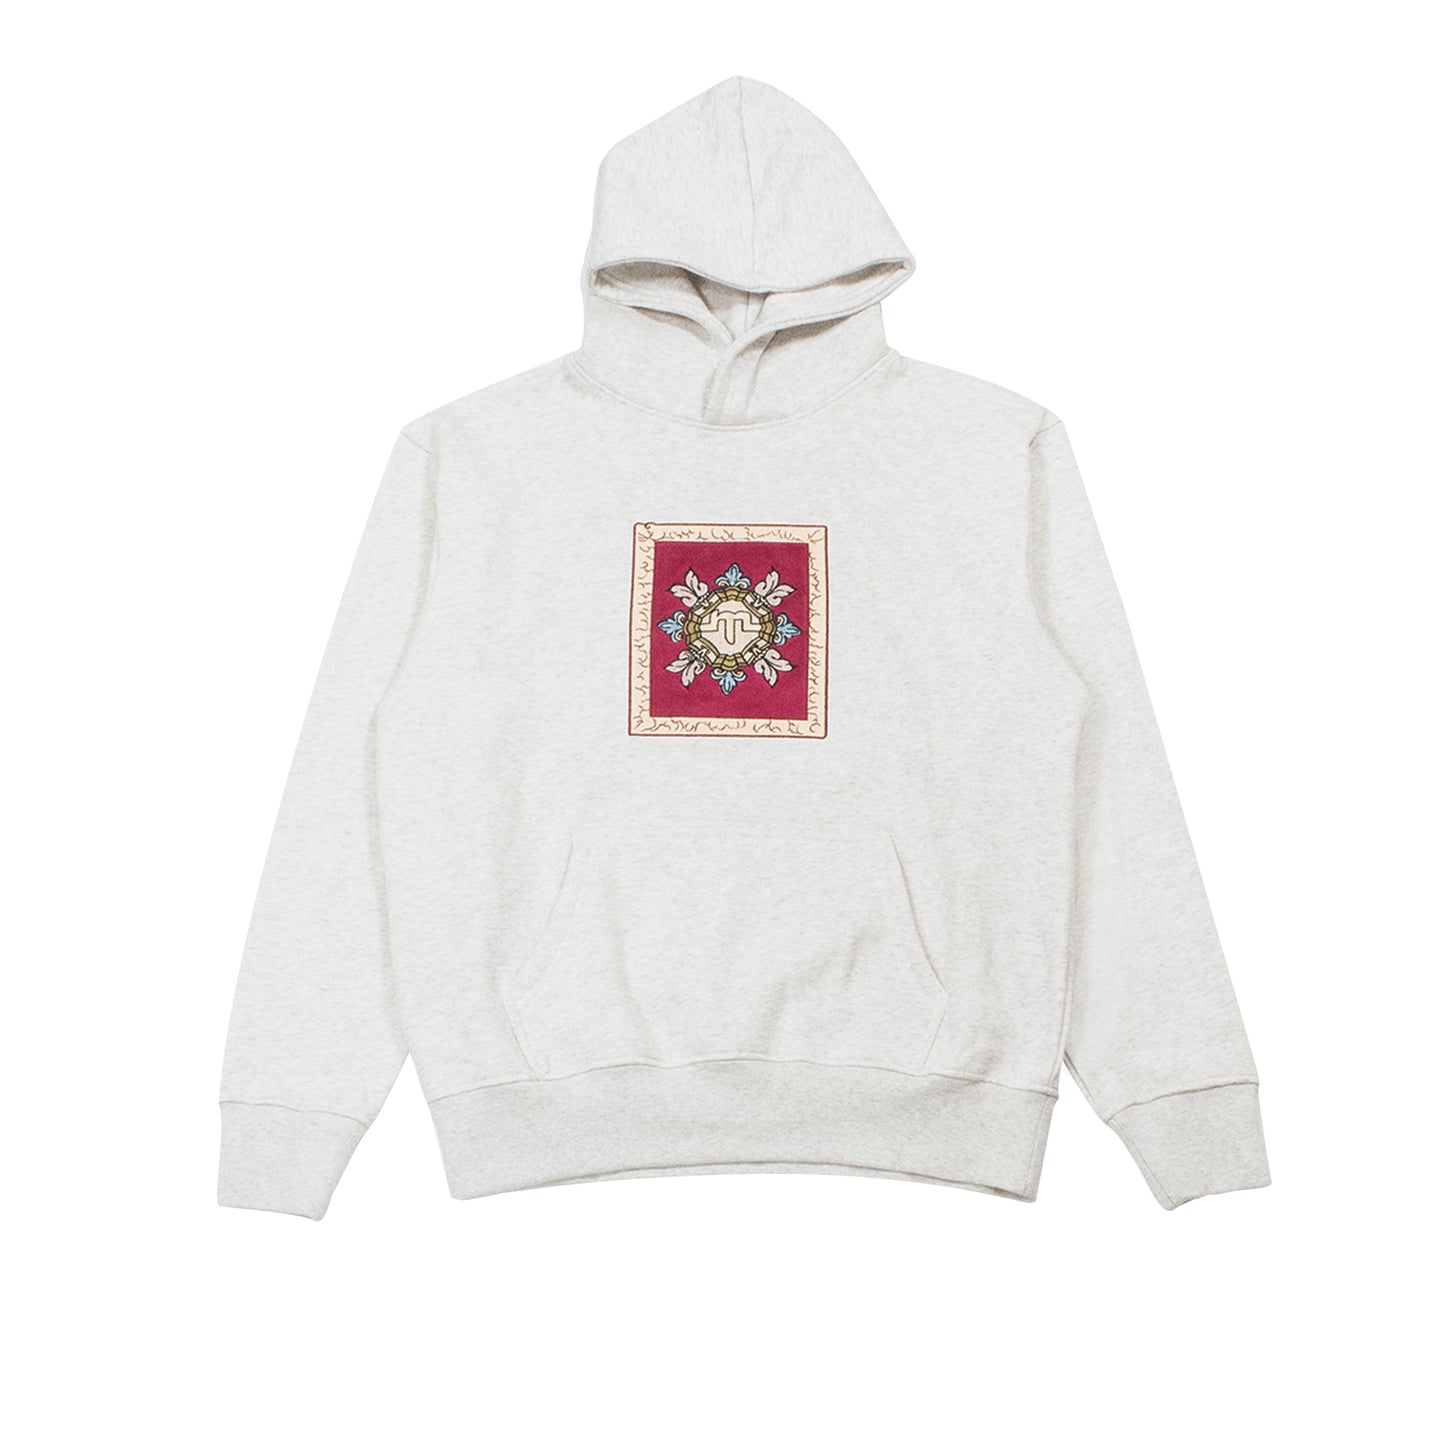 RED STOLEN PAINT FROM THE LOUVRE HOODIE